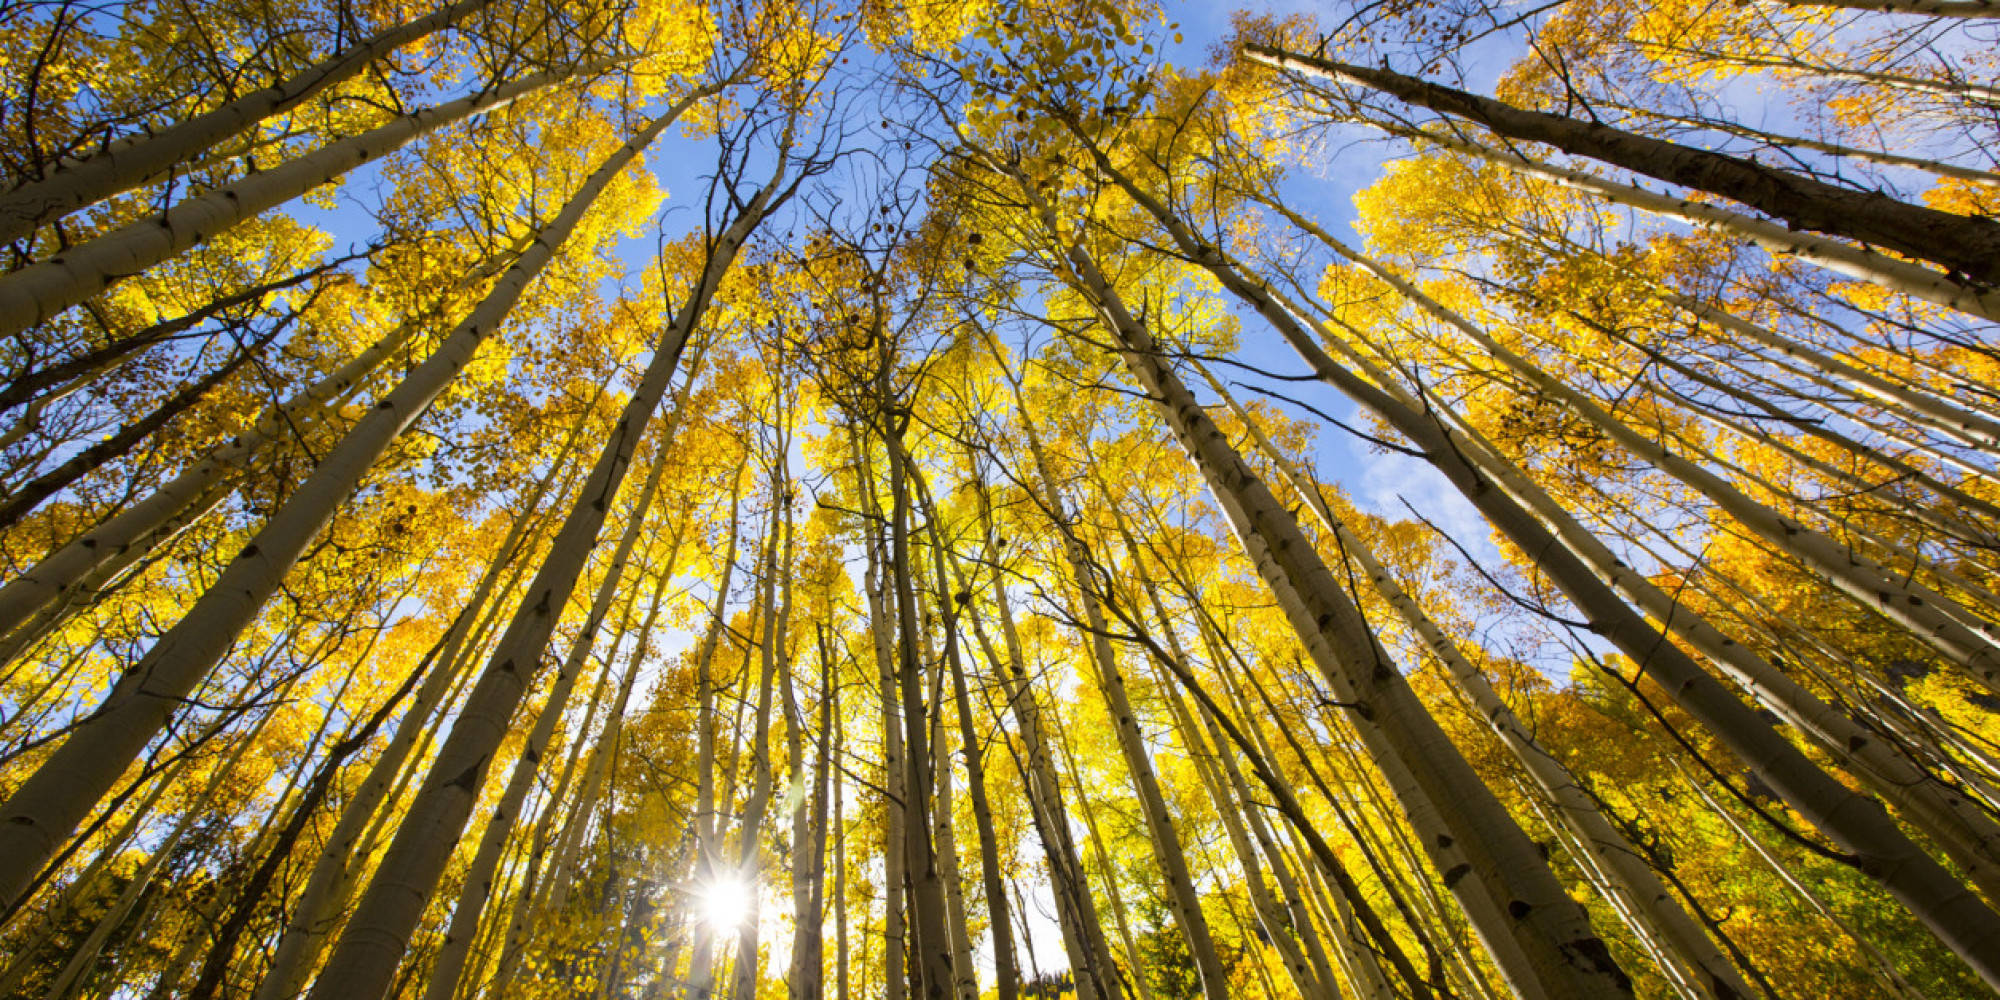 21 Reasons To Celebrate The Value Of Trees In Honor Of International